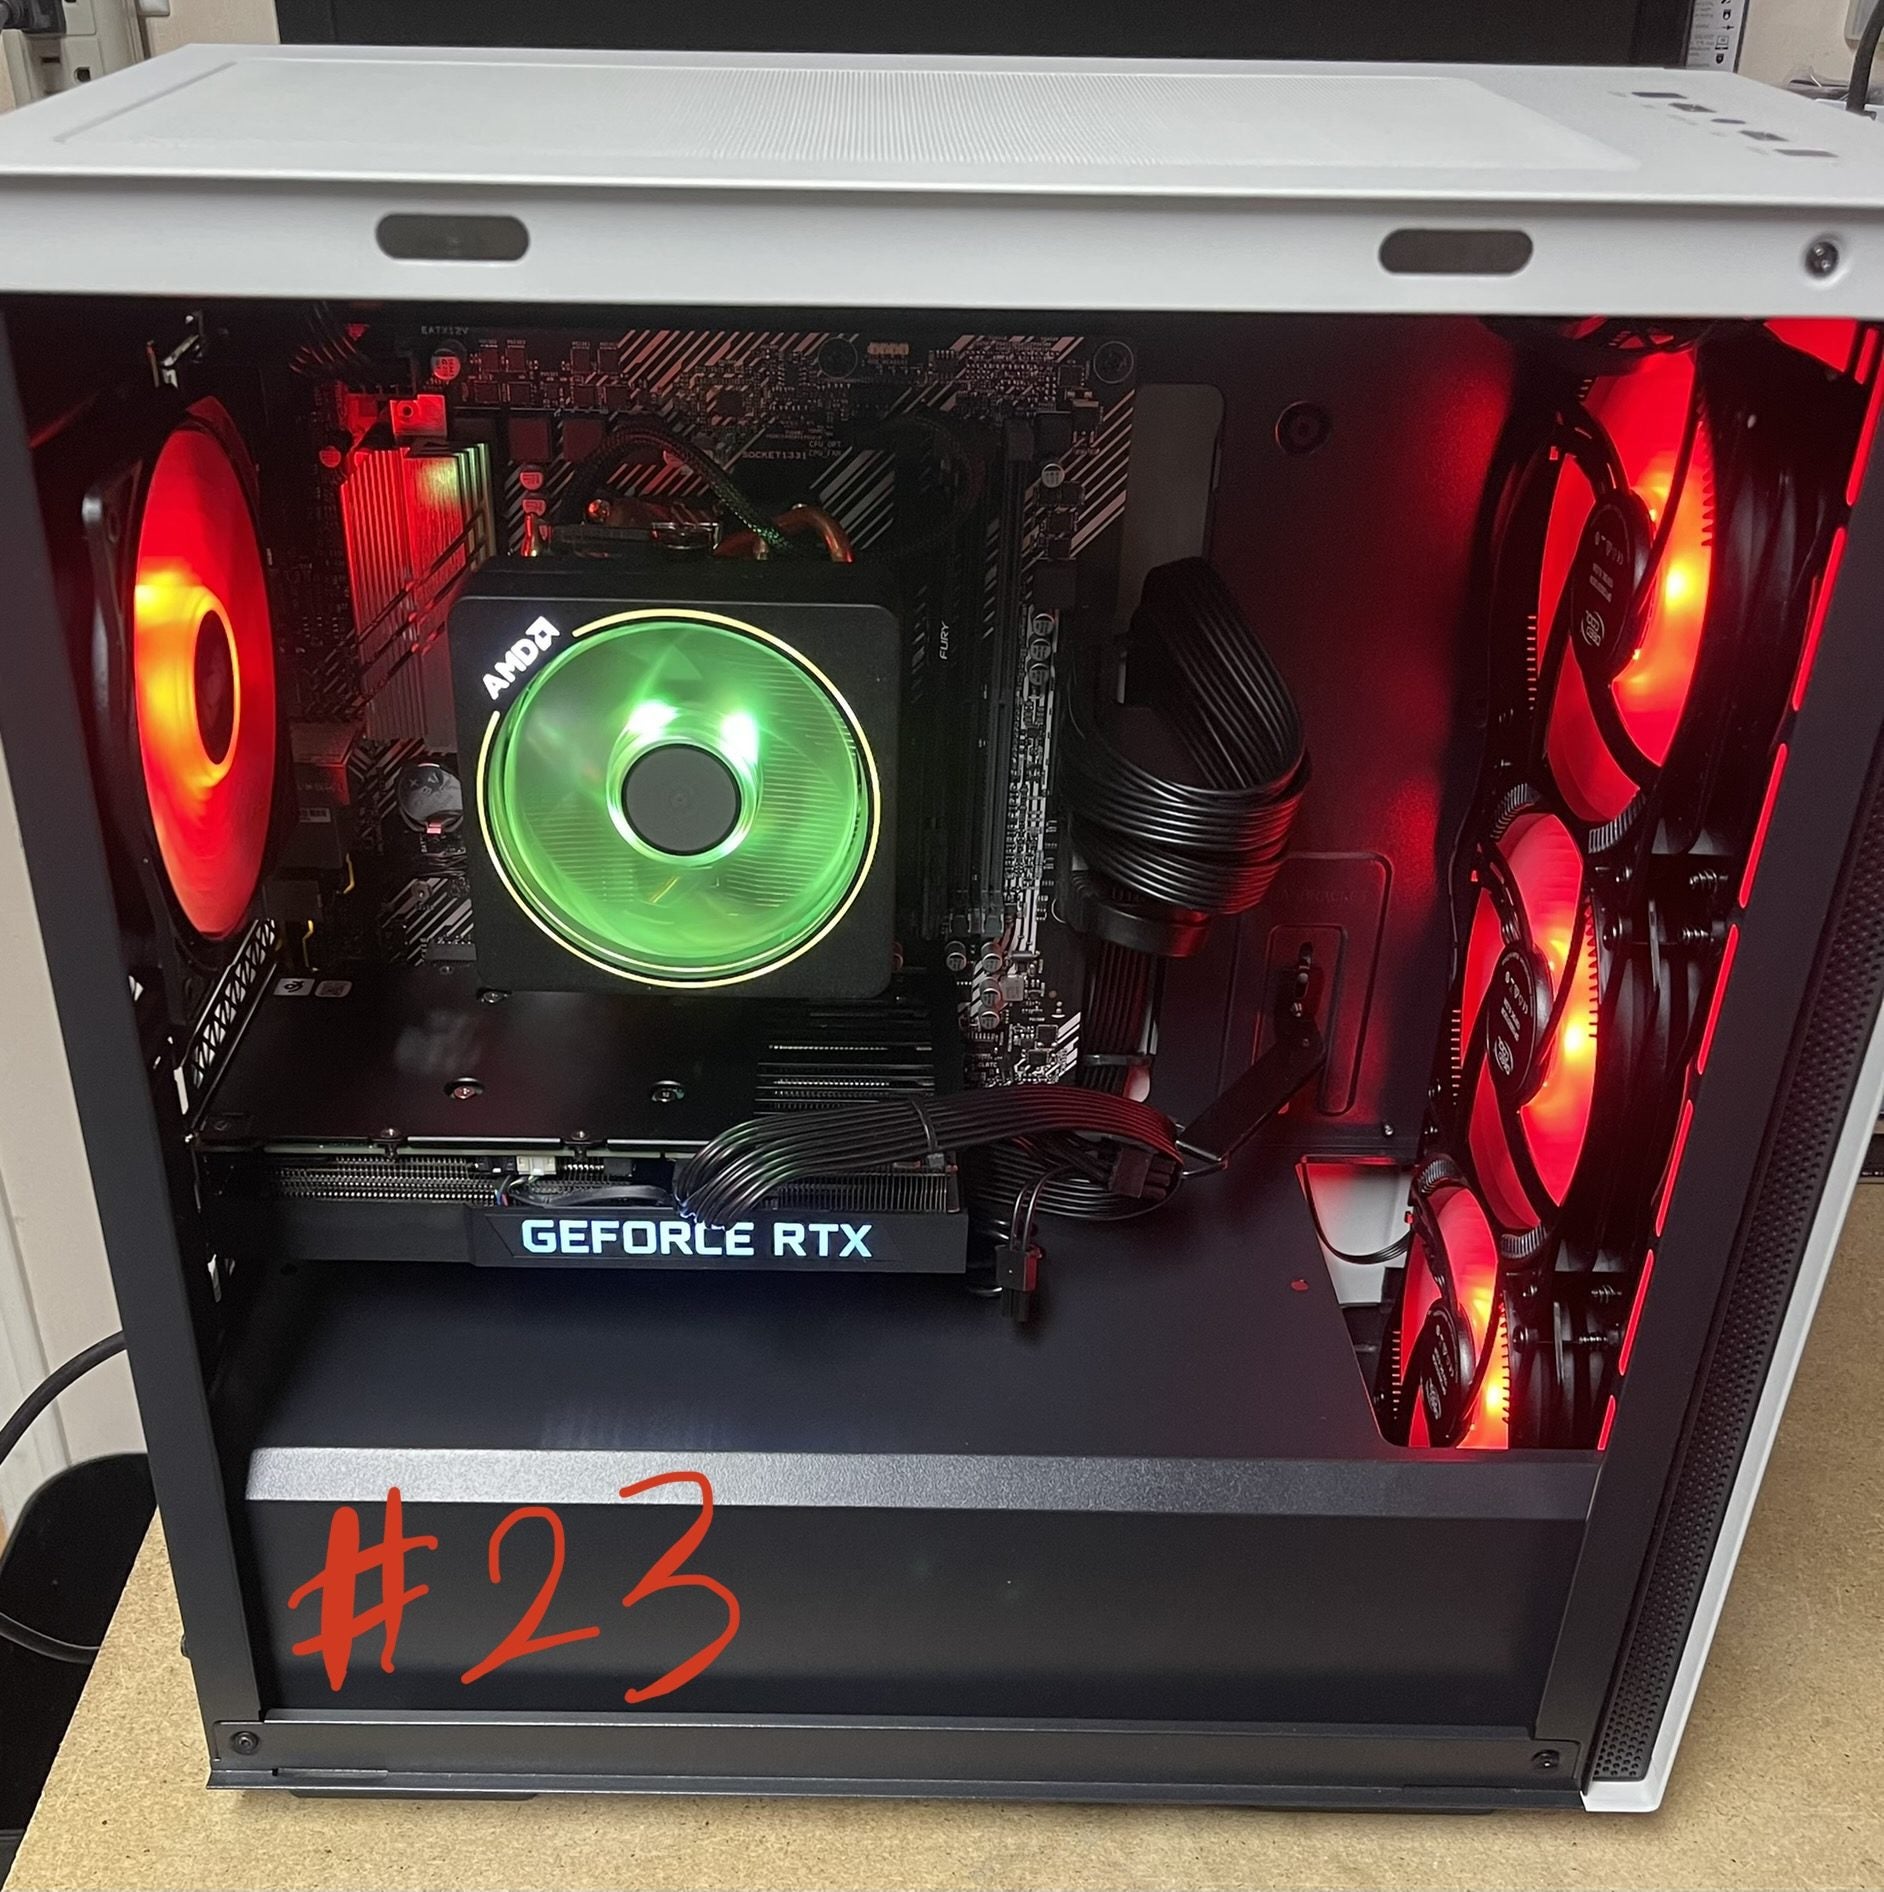 9 Custom Gaming Pc Itx Matx Atx With Rtx 3060 3080 3090 For Sale Redflagdeals Com Forums